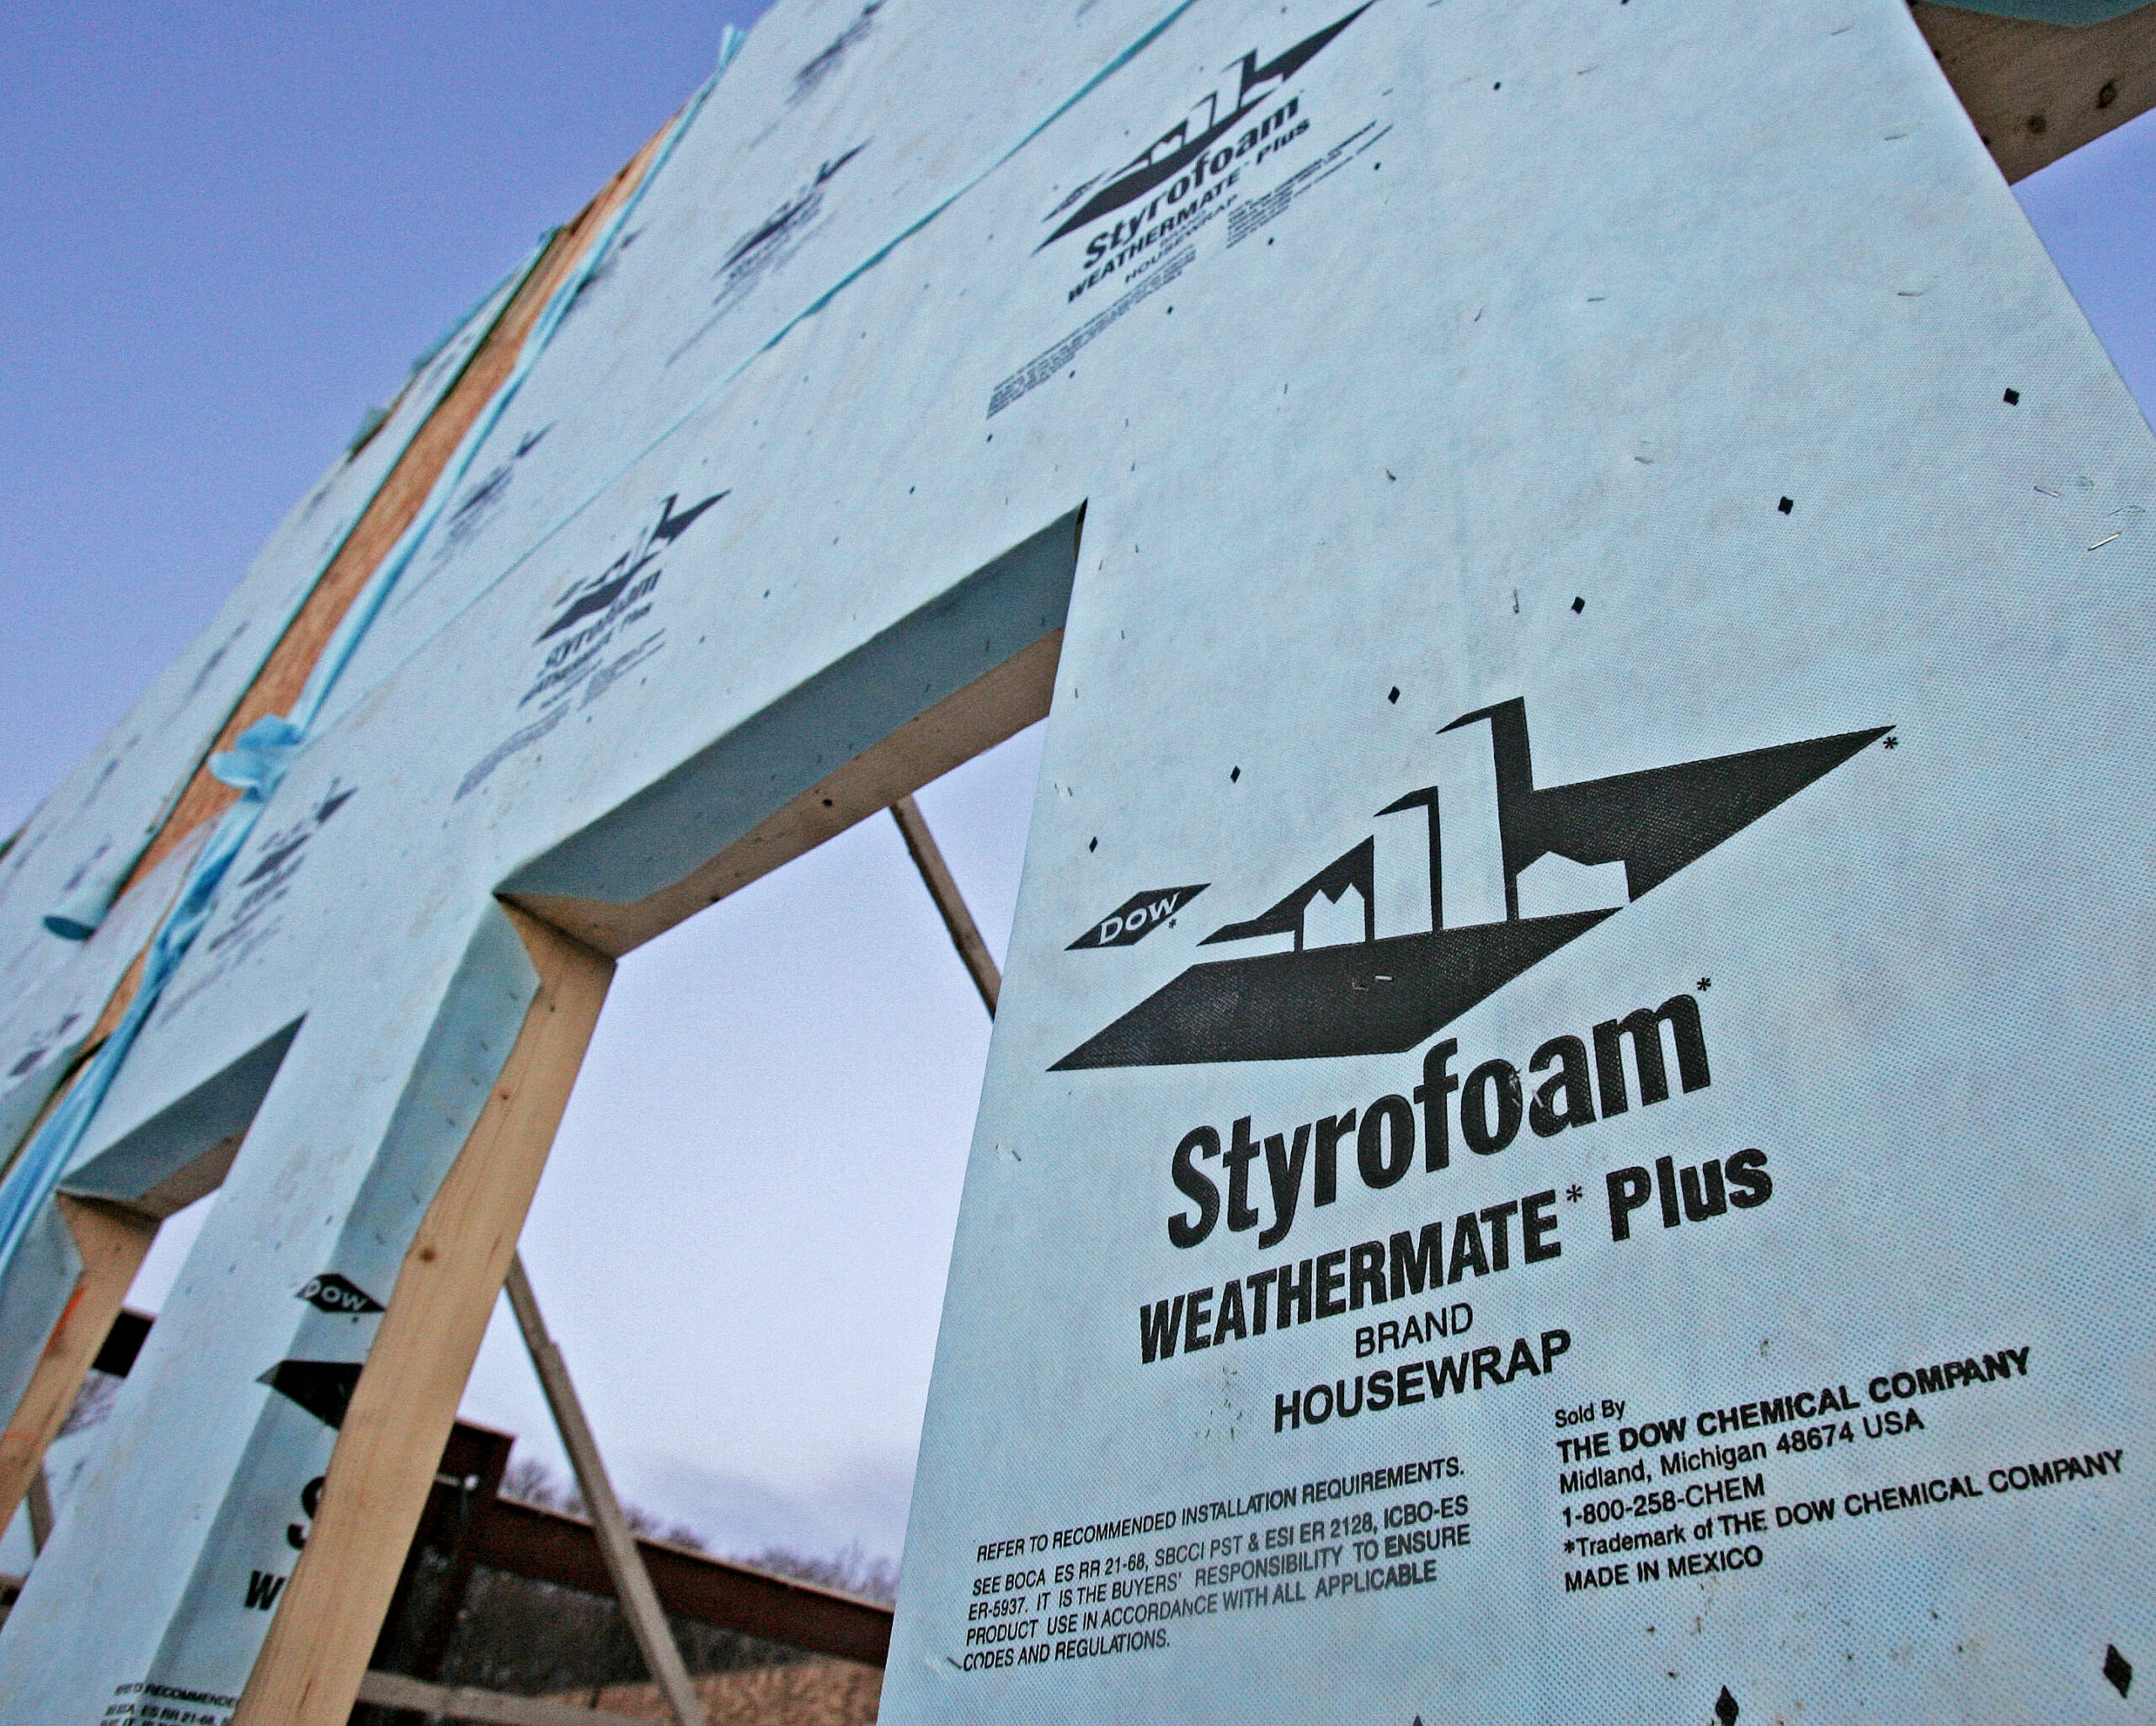 Dow Styrofoam is used on the exterior of a building under construction.